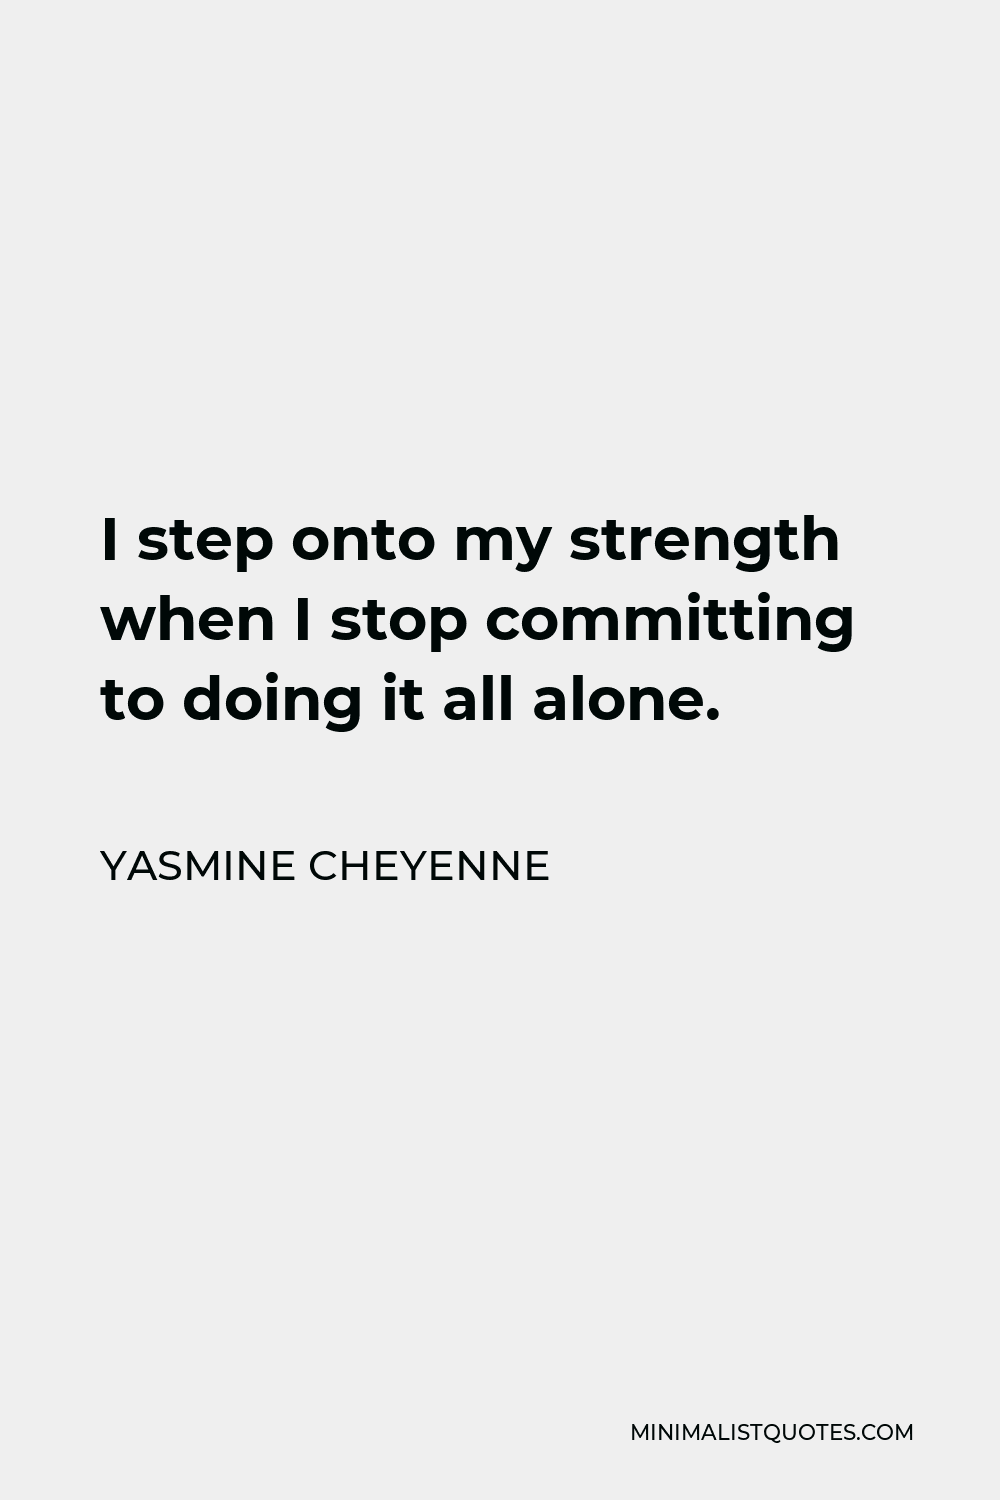 Yasmine Cheyenne Quote - I step onto my strength when I stop committing to doing it all alone.